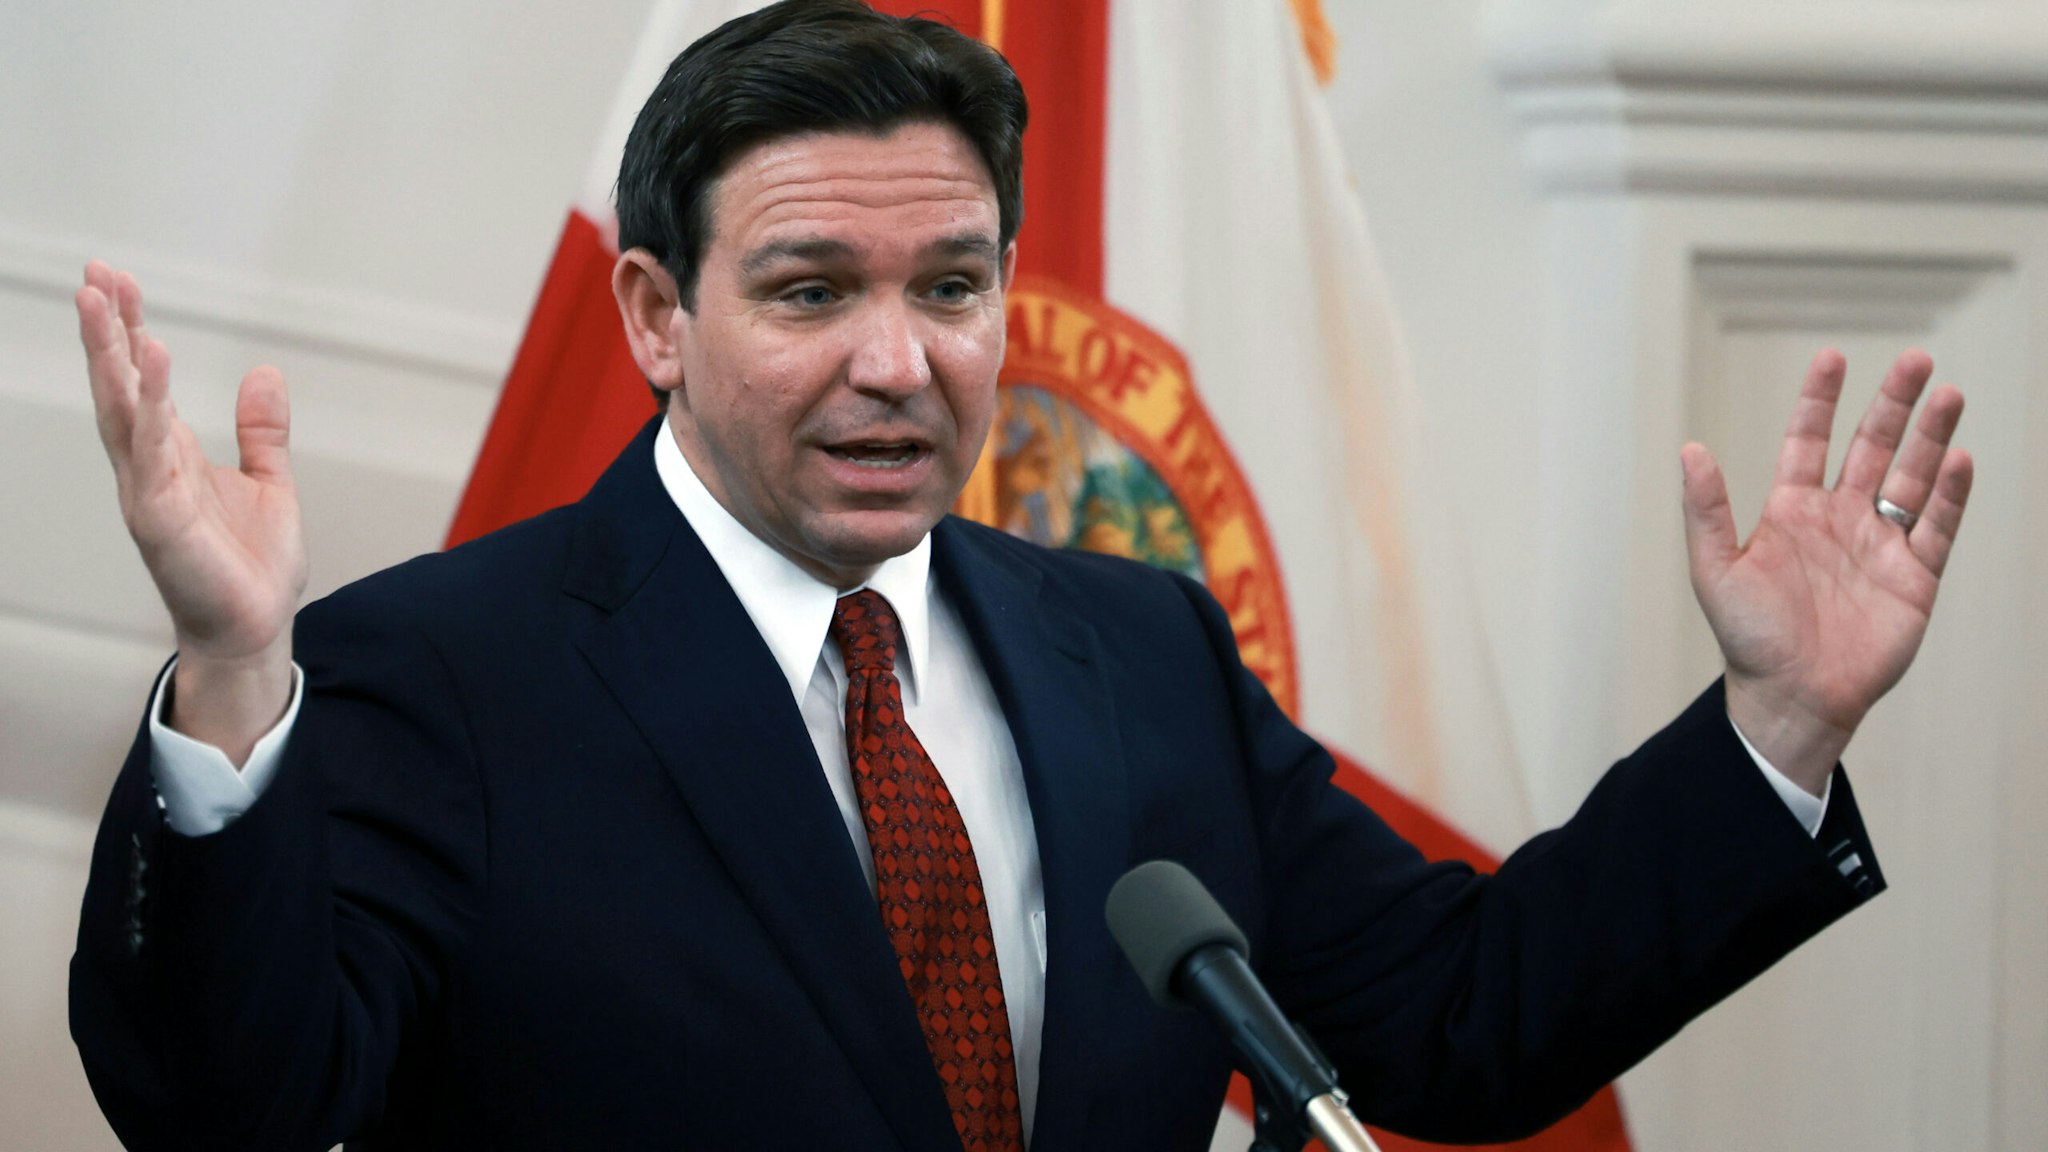 MIAMI BEACH, FLORIDA - FEBRUARY 05: Florida Gov. Ron DeSantis speaks during a news conference on February 05, 2024 in Miami Beach, Florida. Among other topics, he addressed the upcoming influx of spring breakers and assured the public that law enforcement officials and resources were available to maintain order if needed.